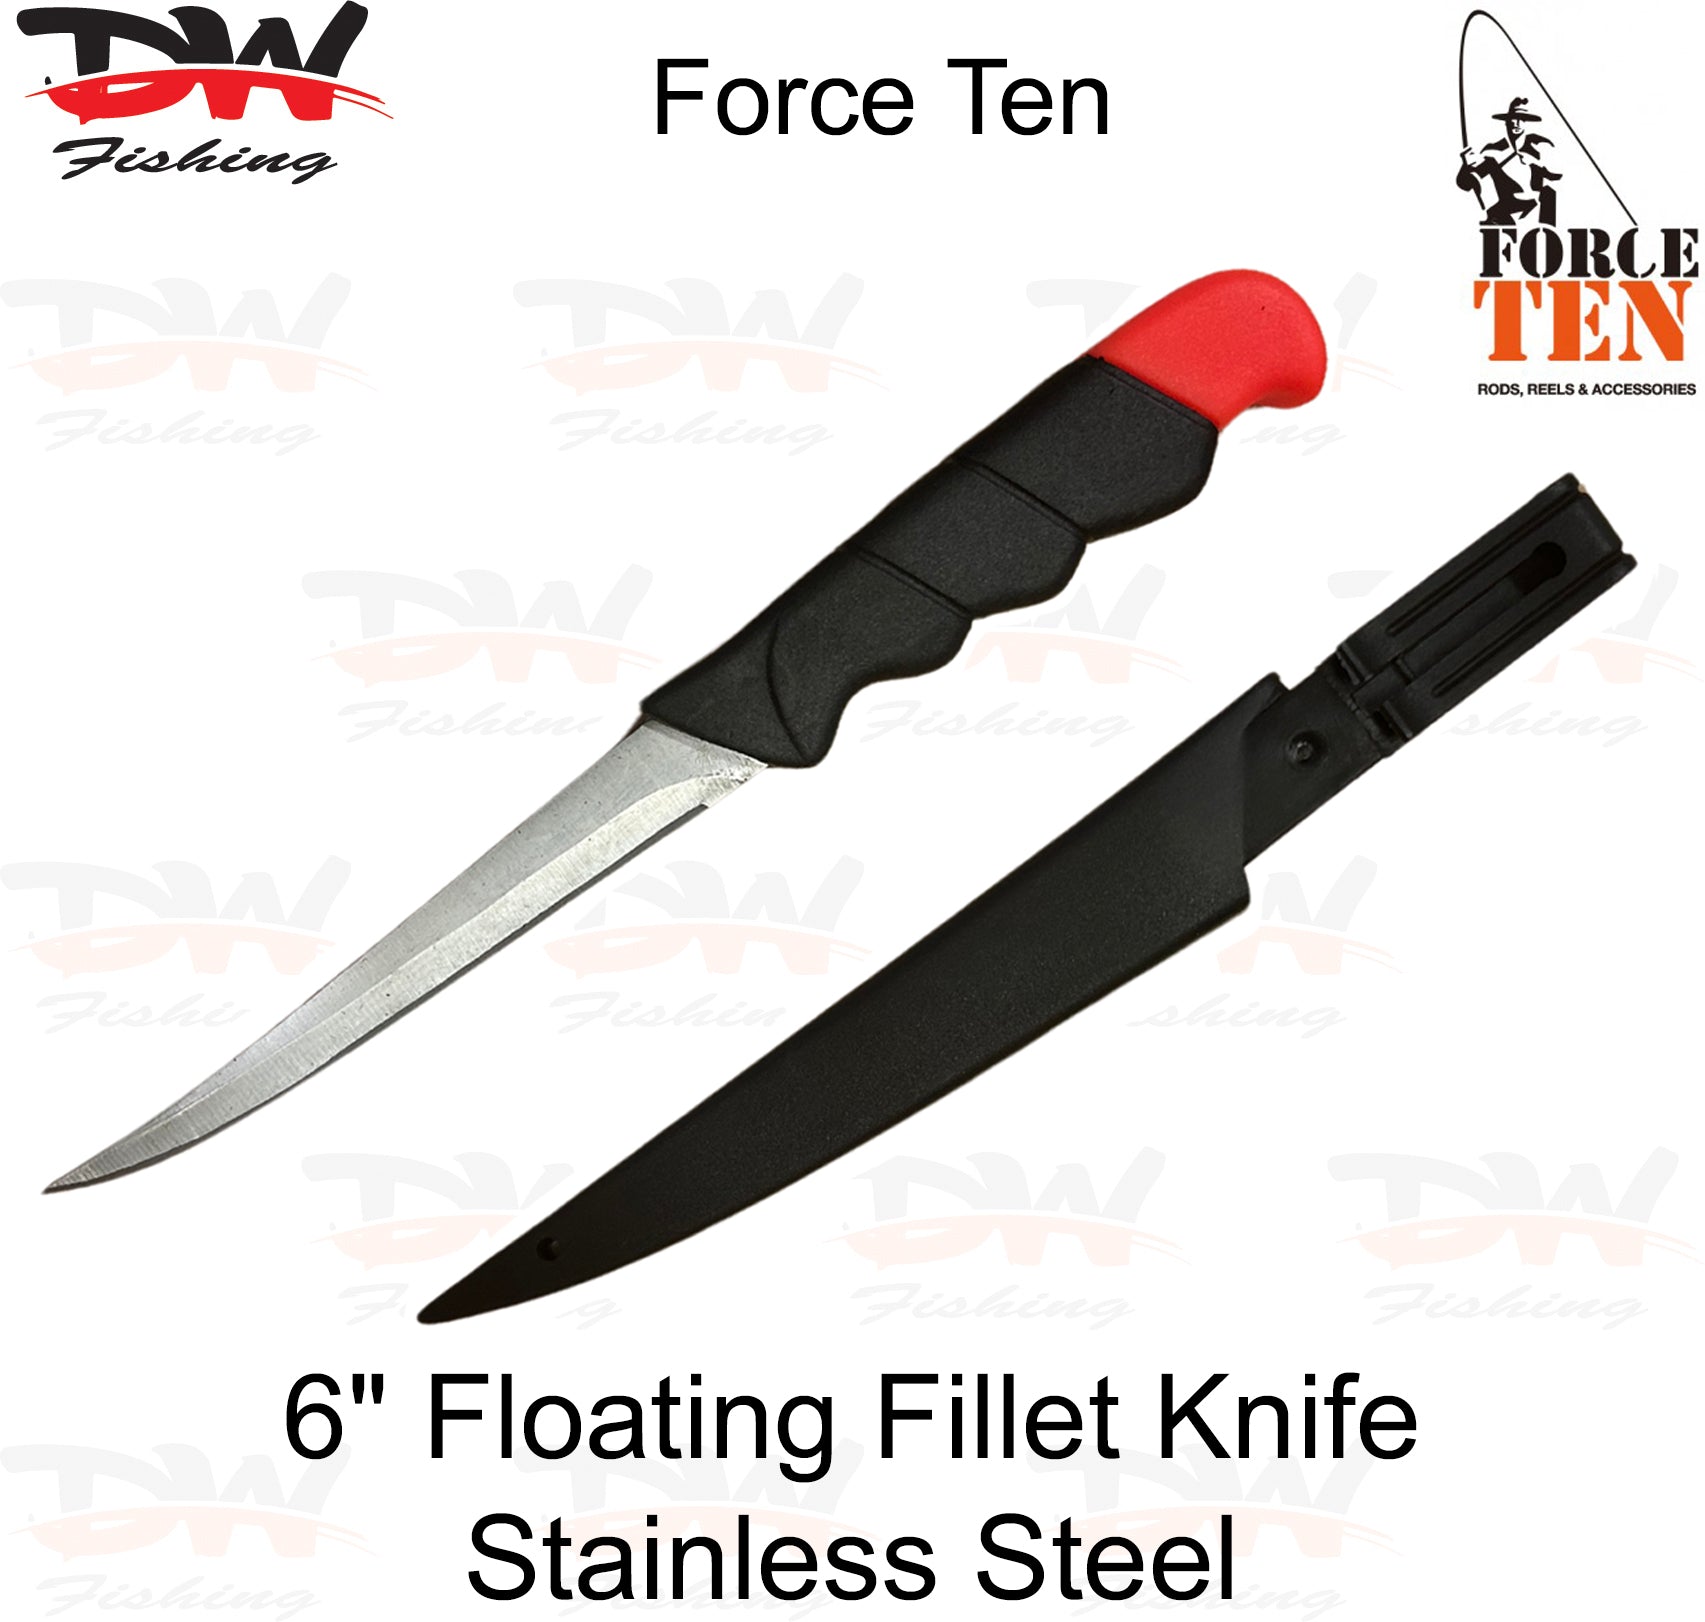 Force Ten brand fish fillet knife 15cm blade length with protective sheath